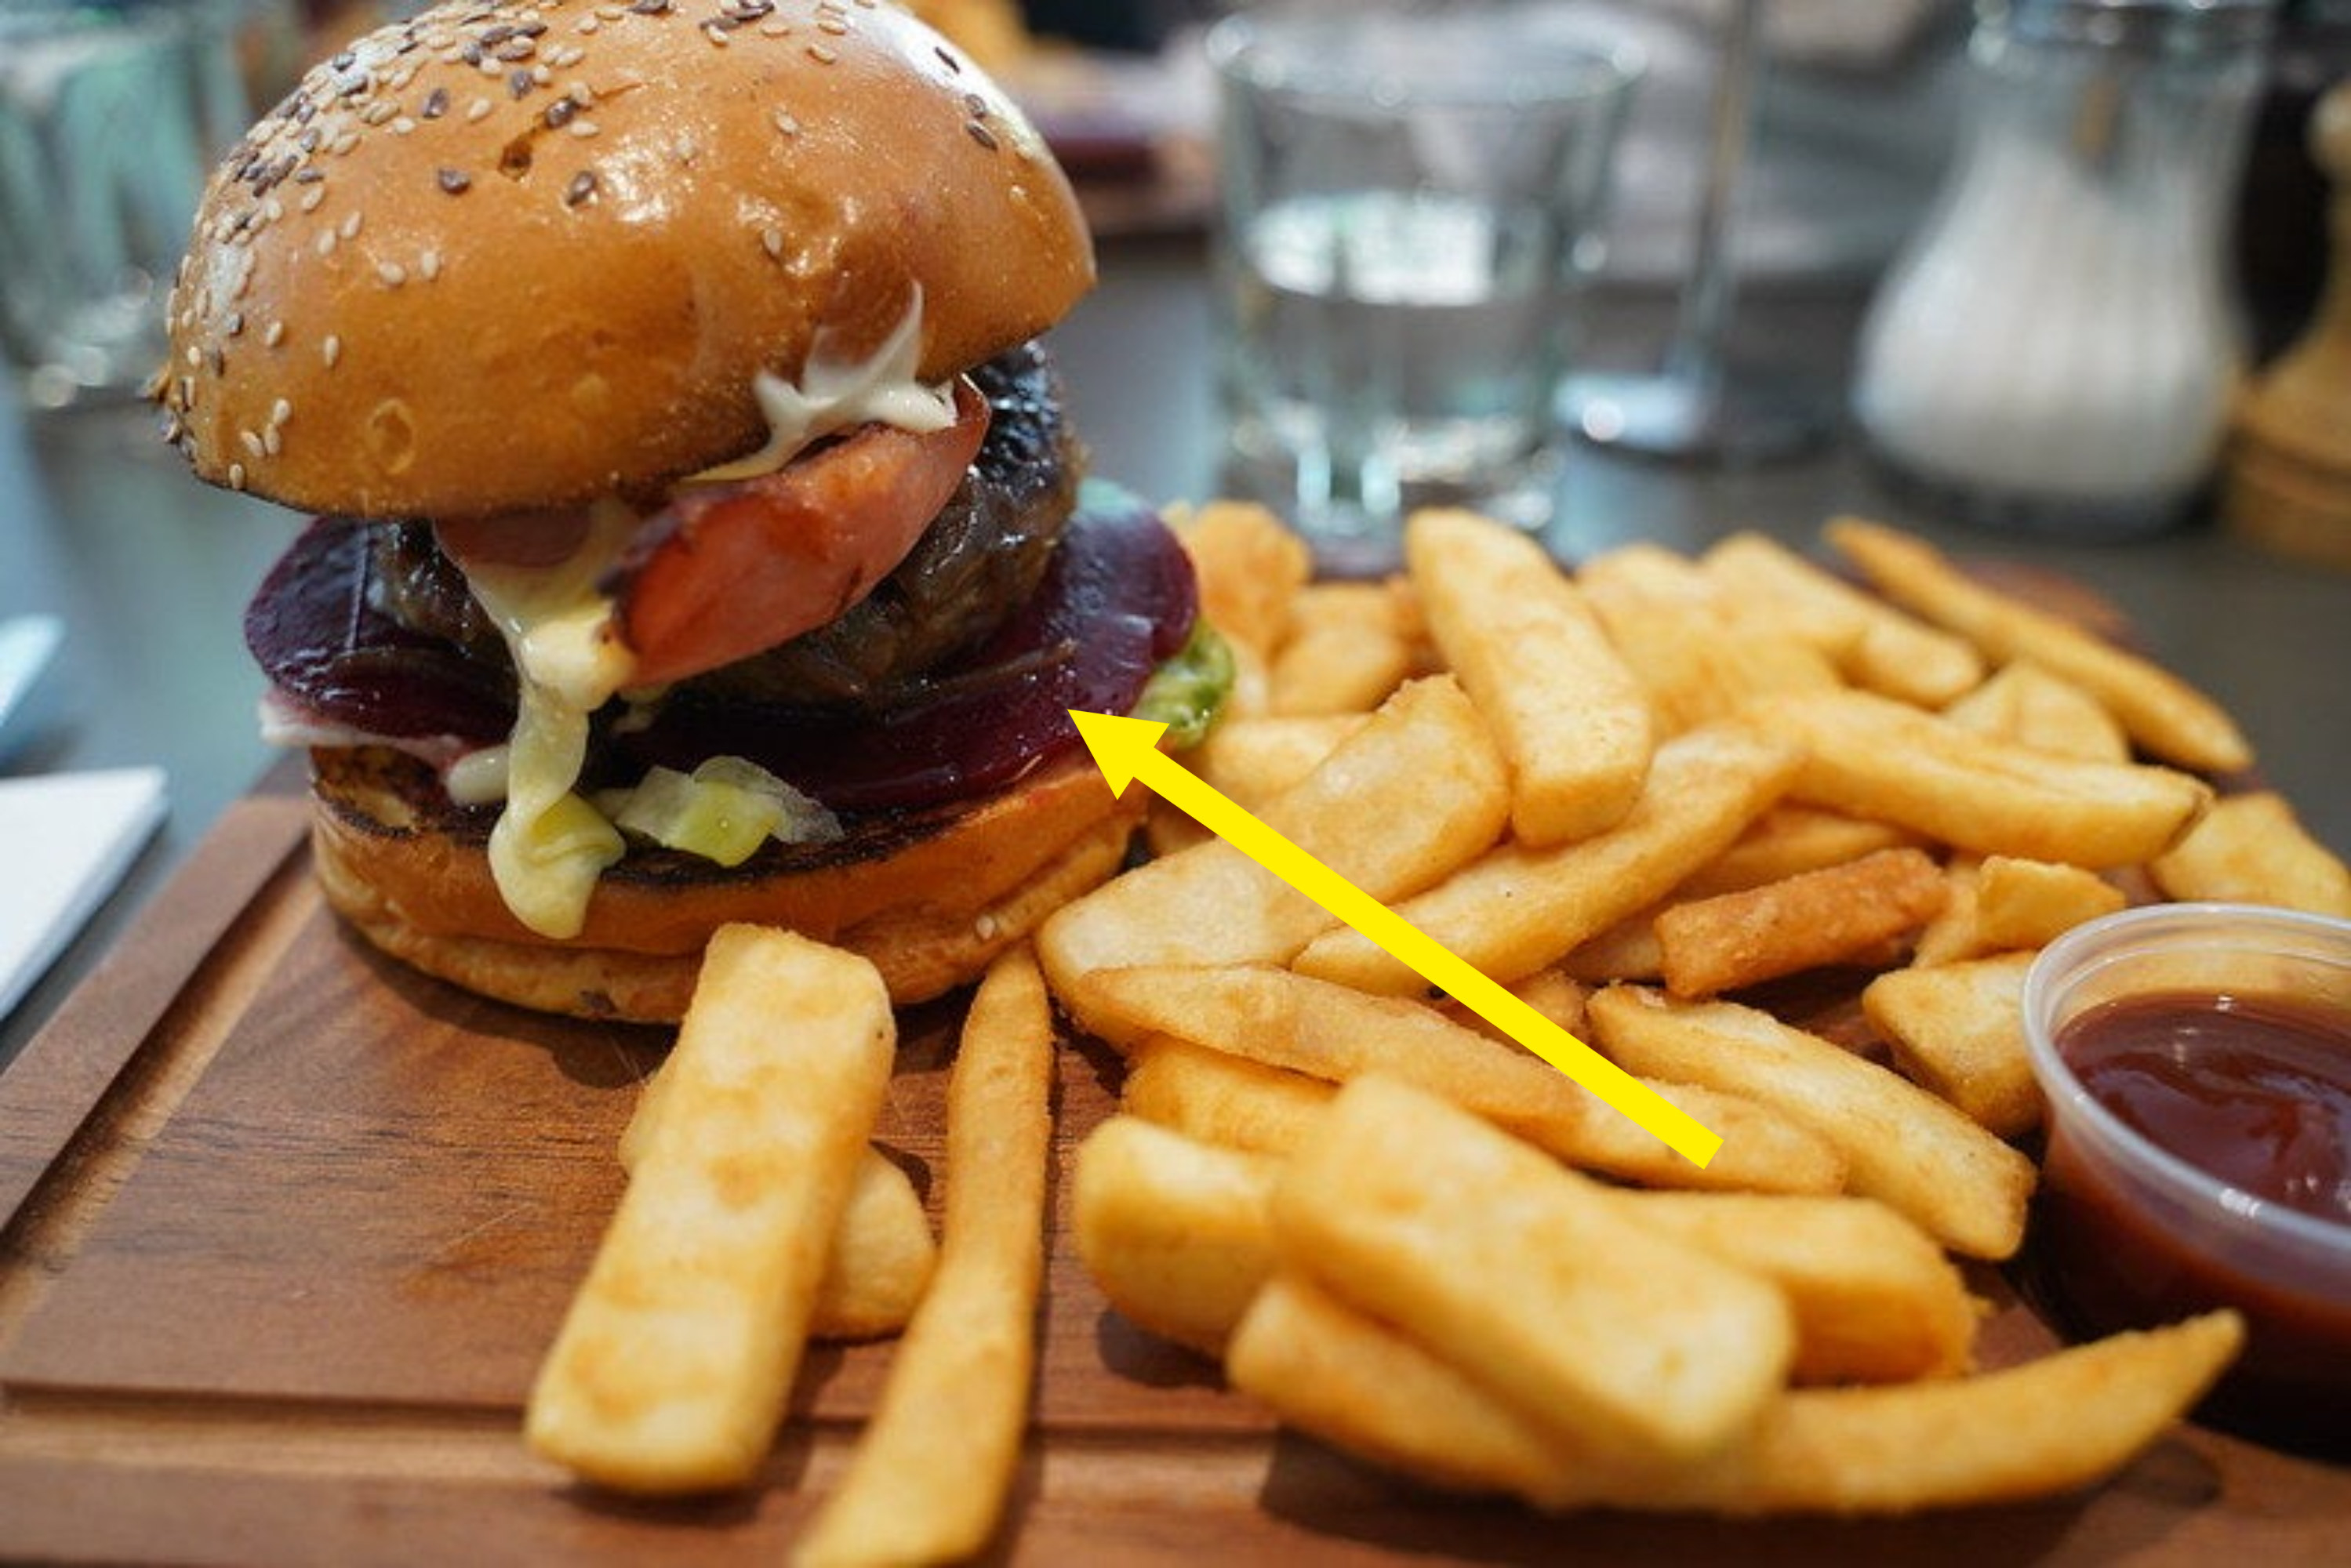 A serving board with an Aussie burger (with beetroot) and chips